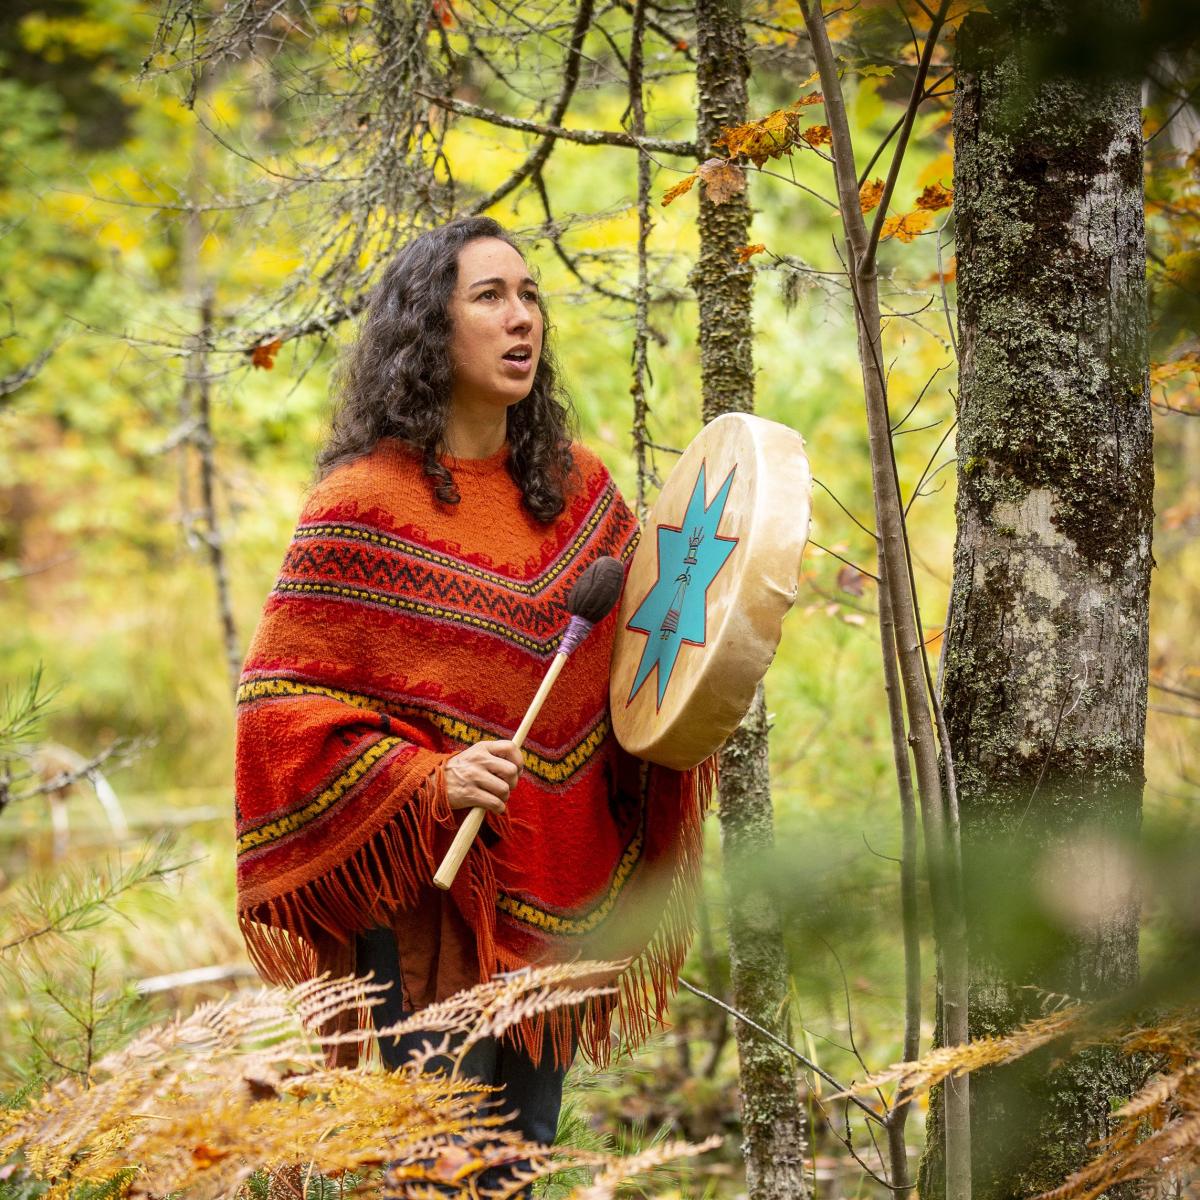 A woman stands in a forest holding a drum